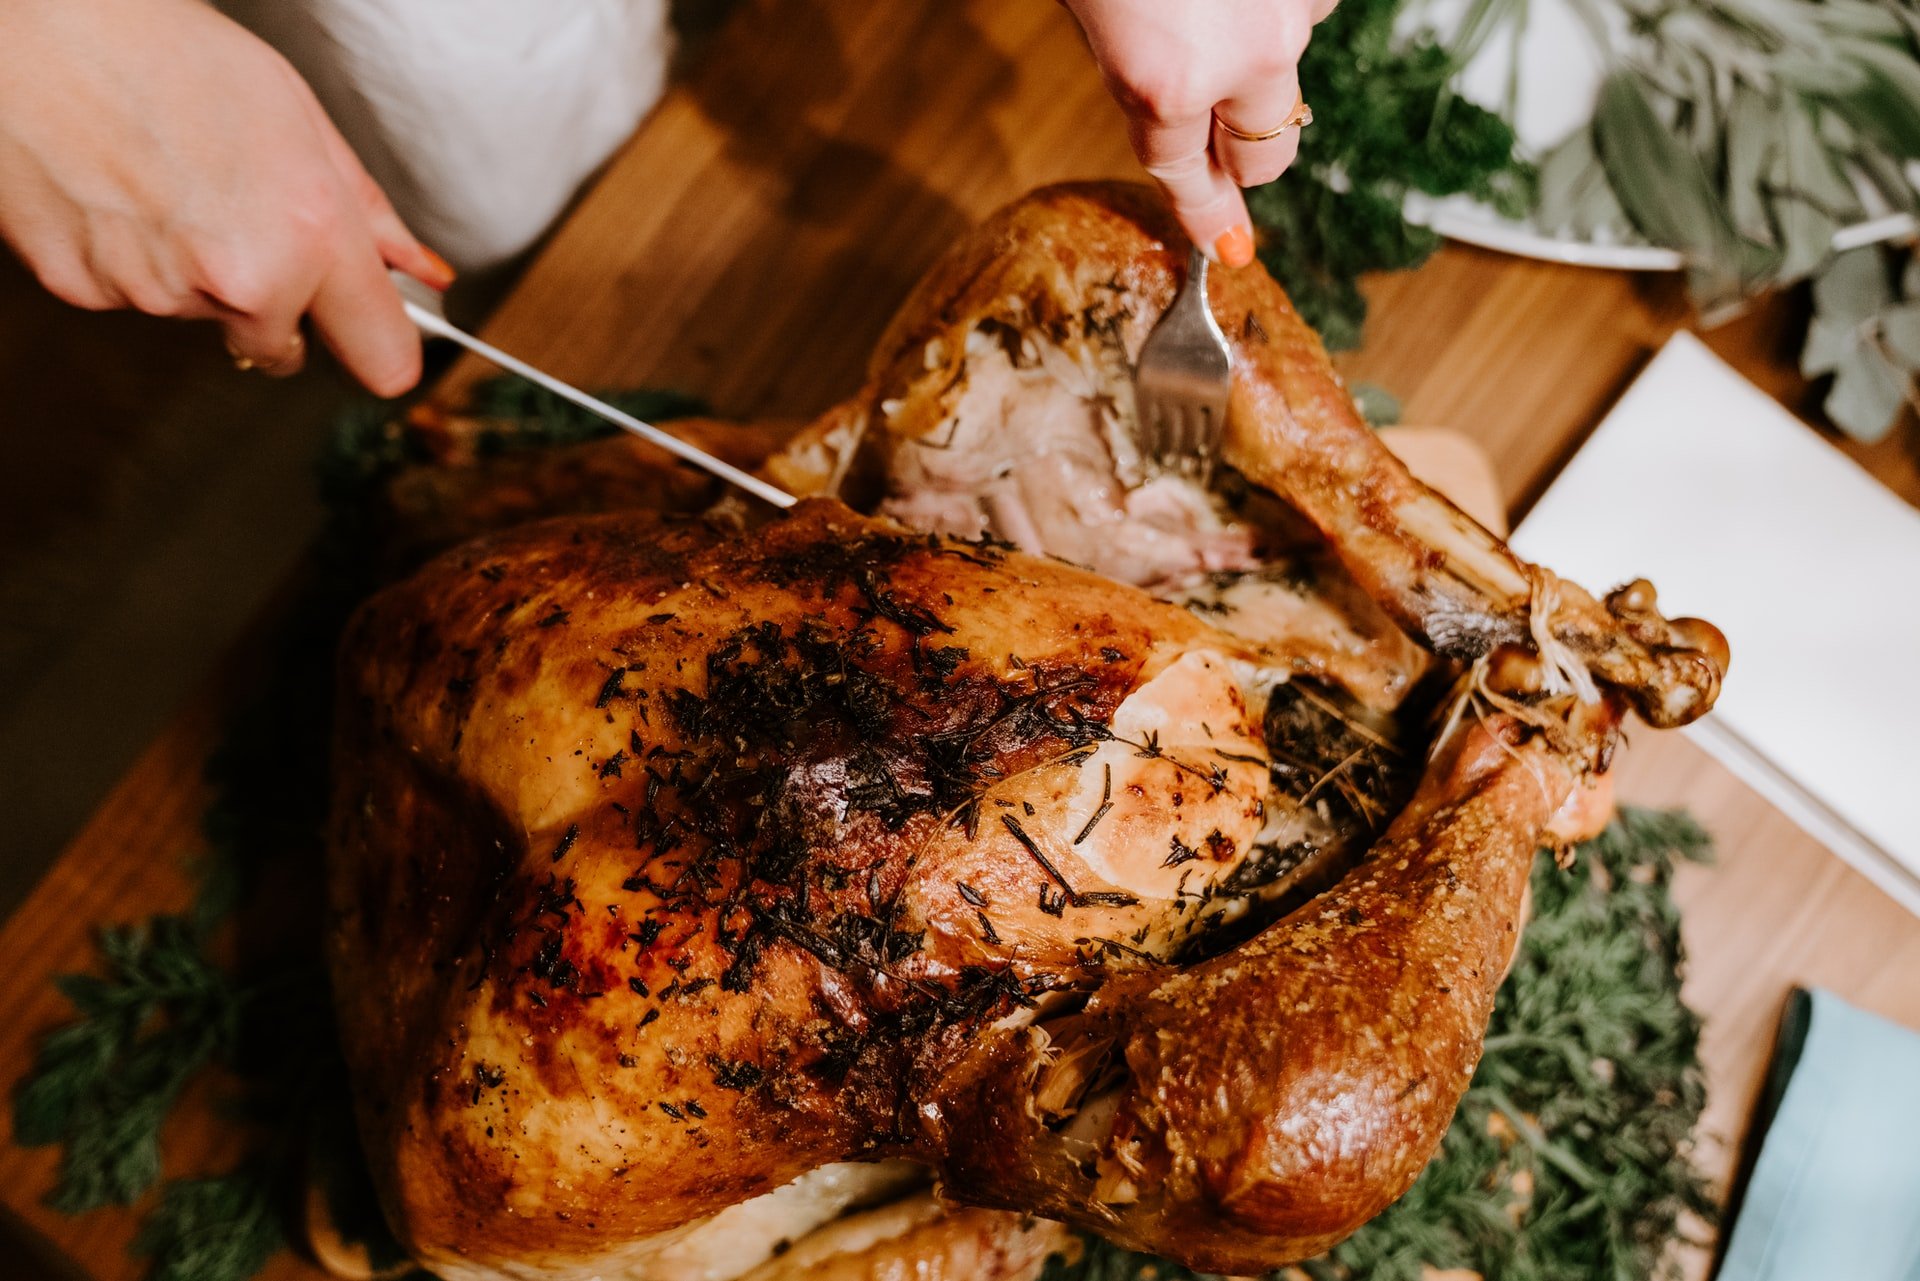 She invited her mother-in-law for Easter dinner. | Source: Unsplash